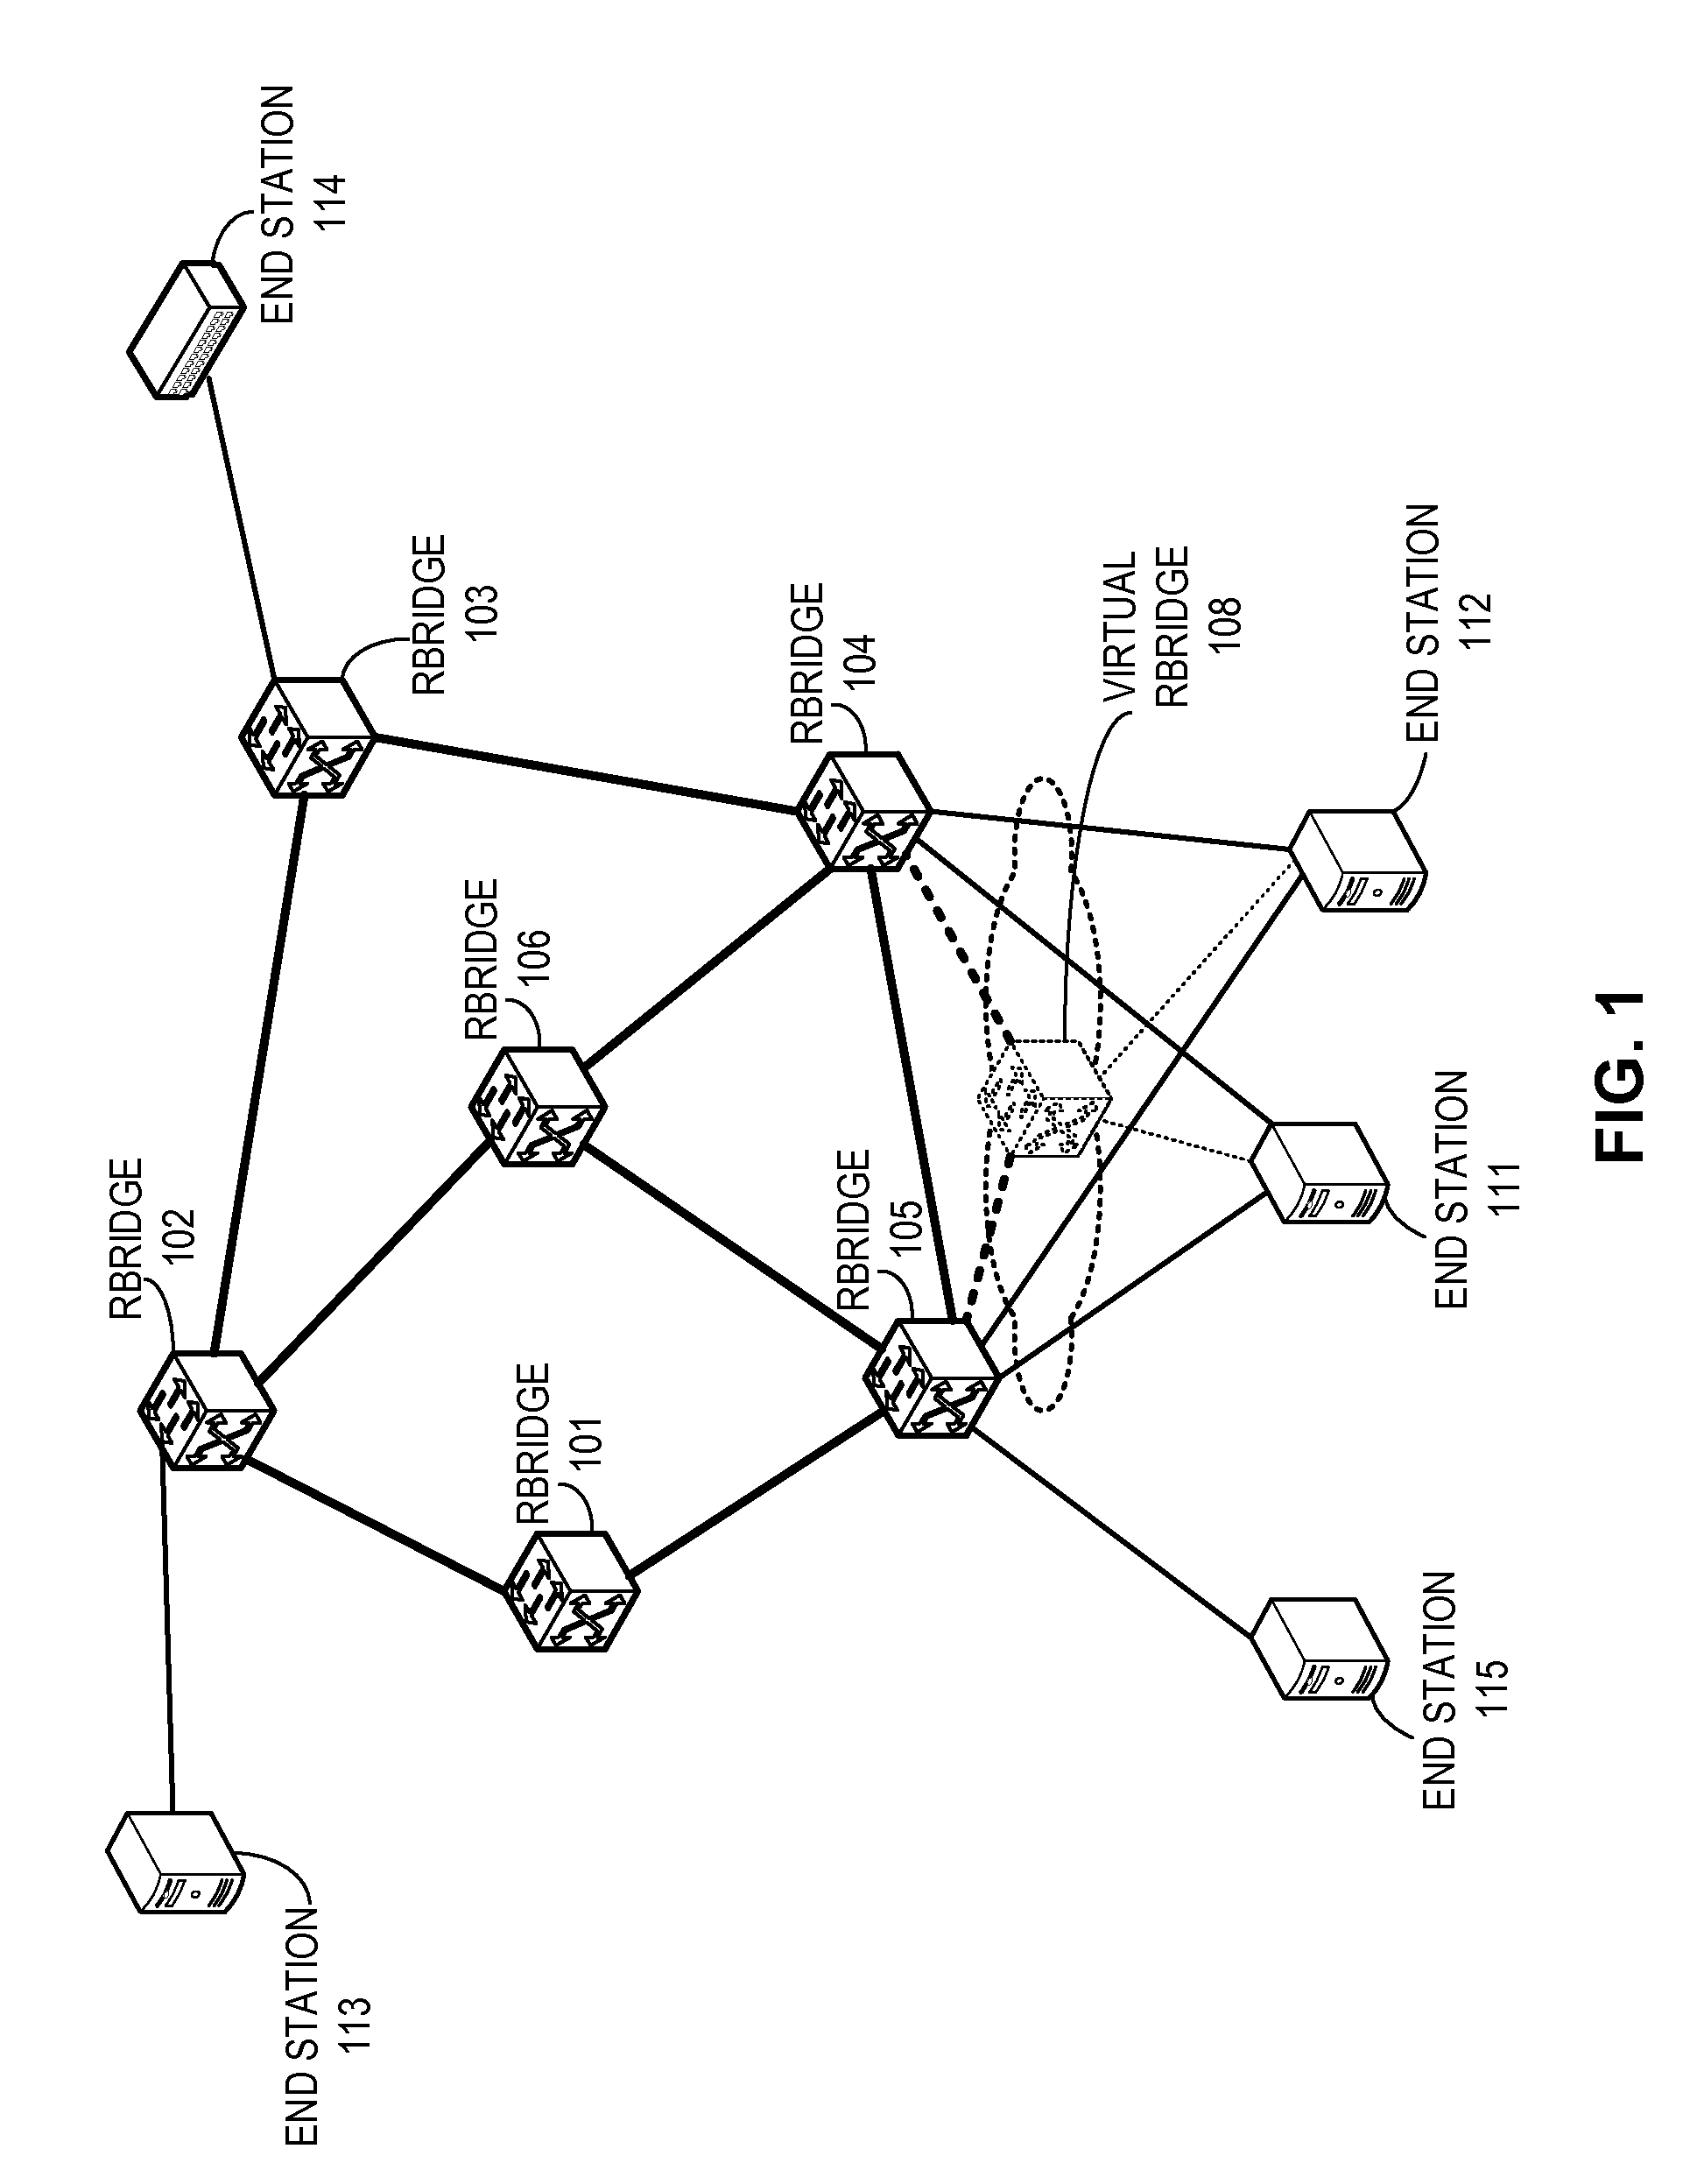 Redundant host connection in a routed network